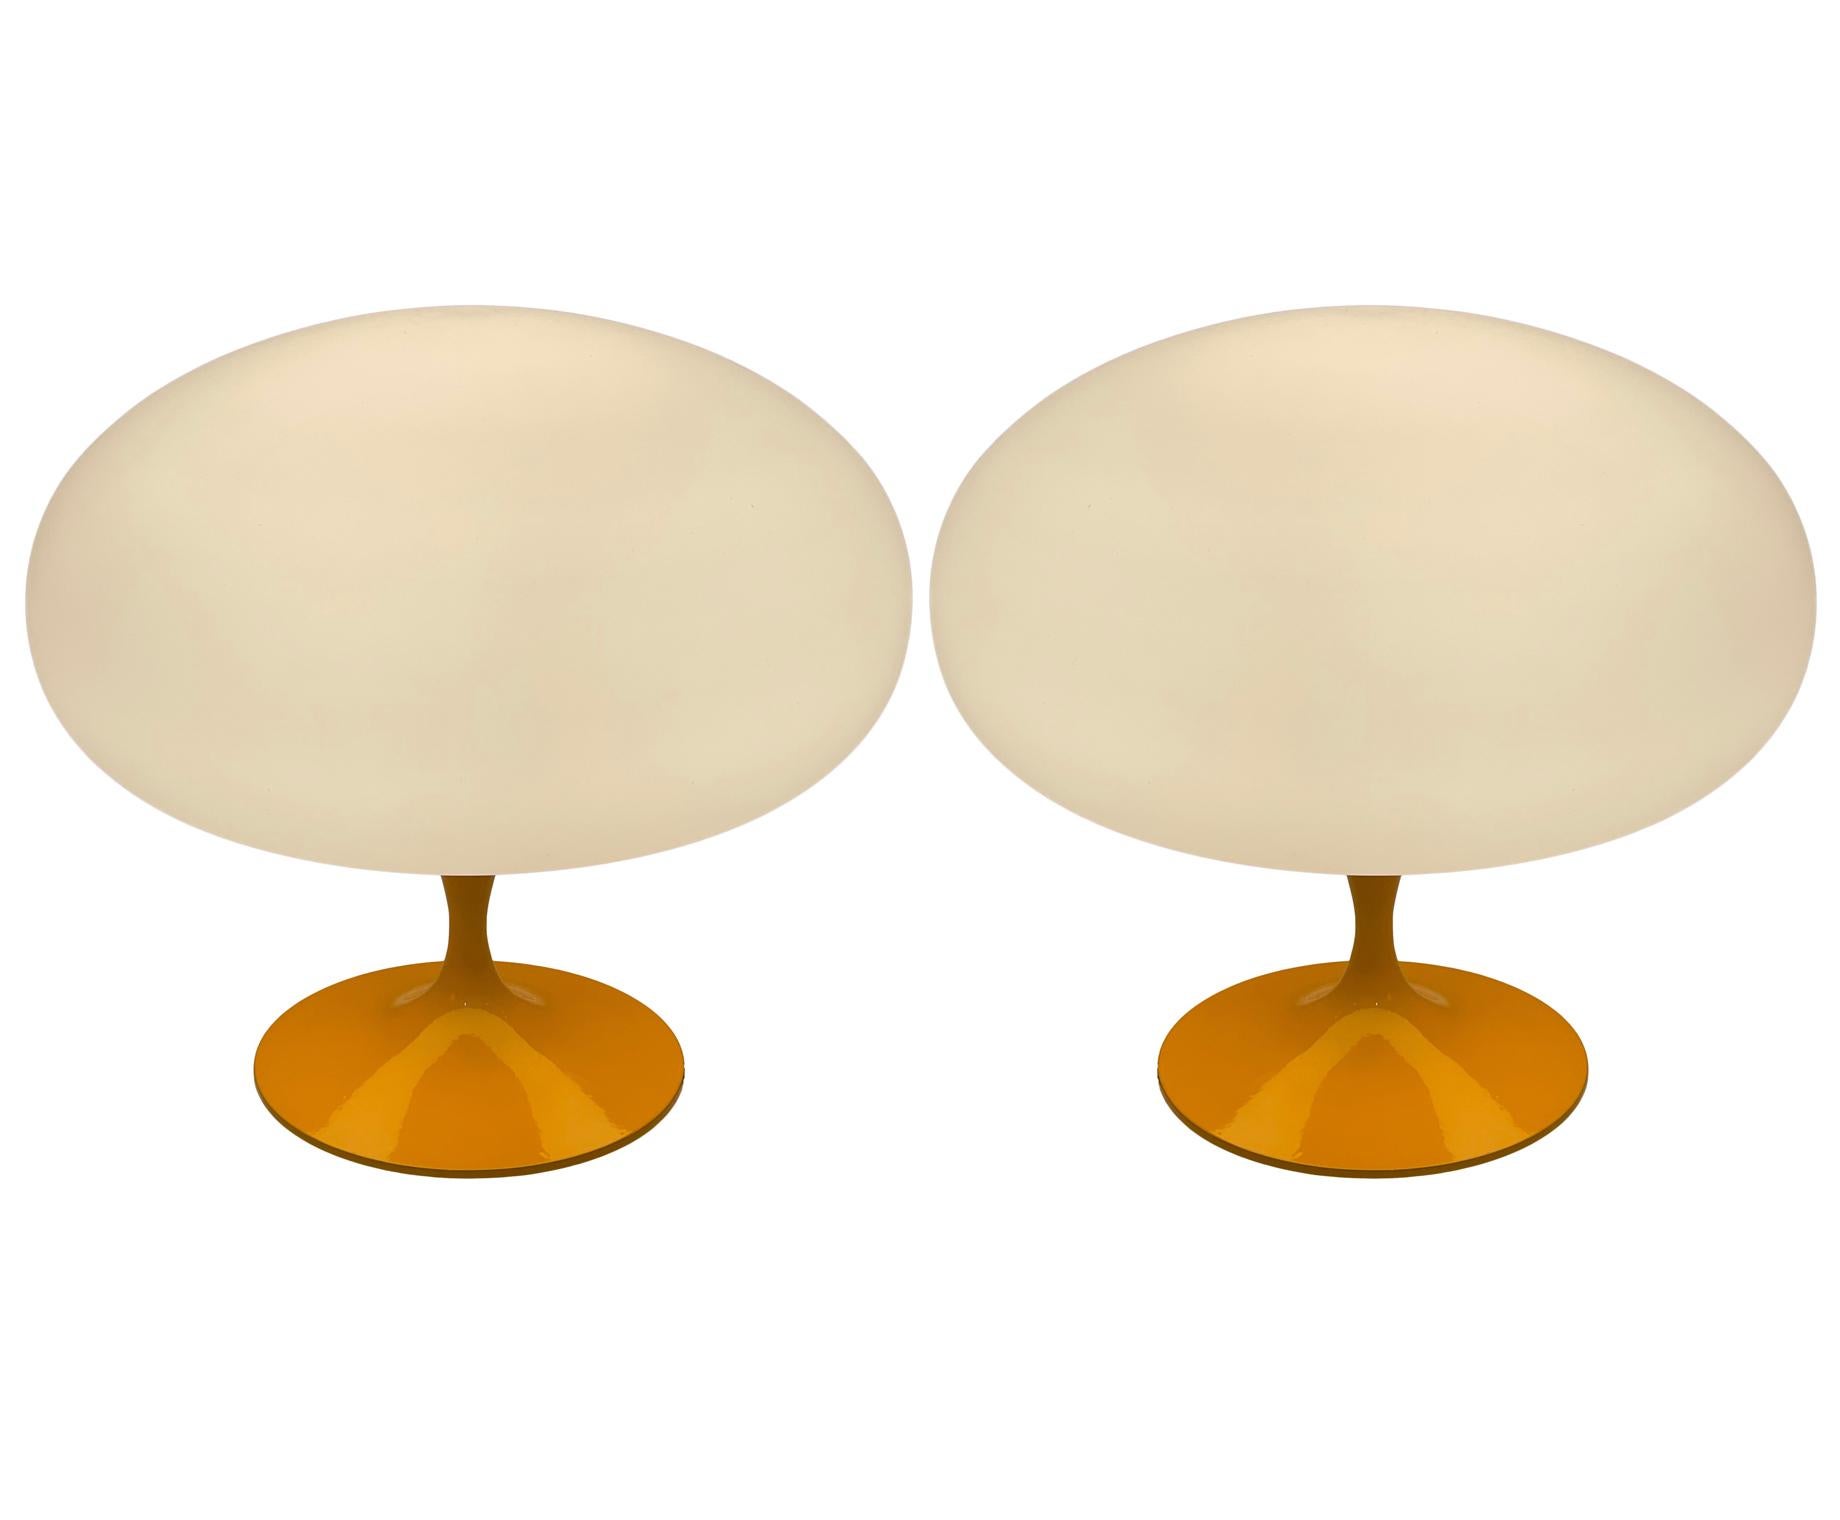 Aluminum Pair of Mid-Century Tulip Table Lamps by Designline in Orange on White Glass For Sale